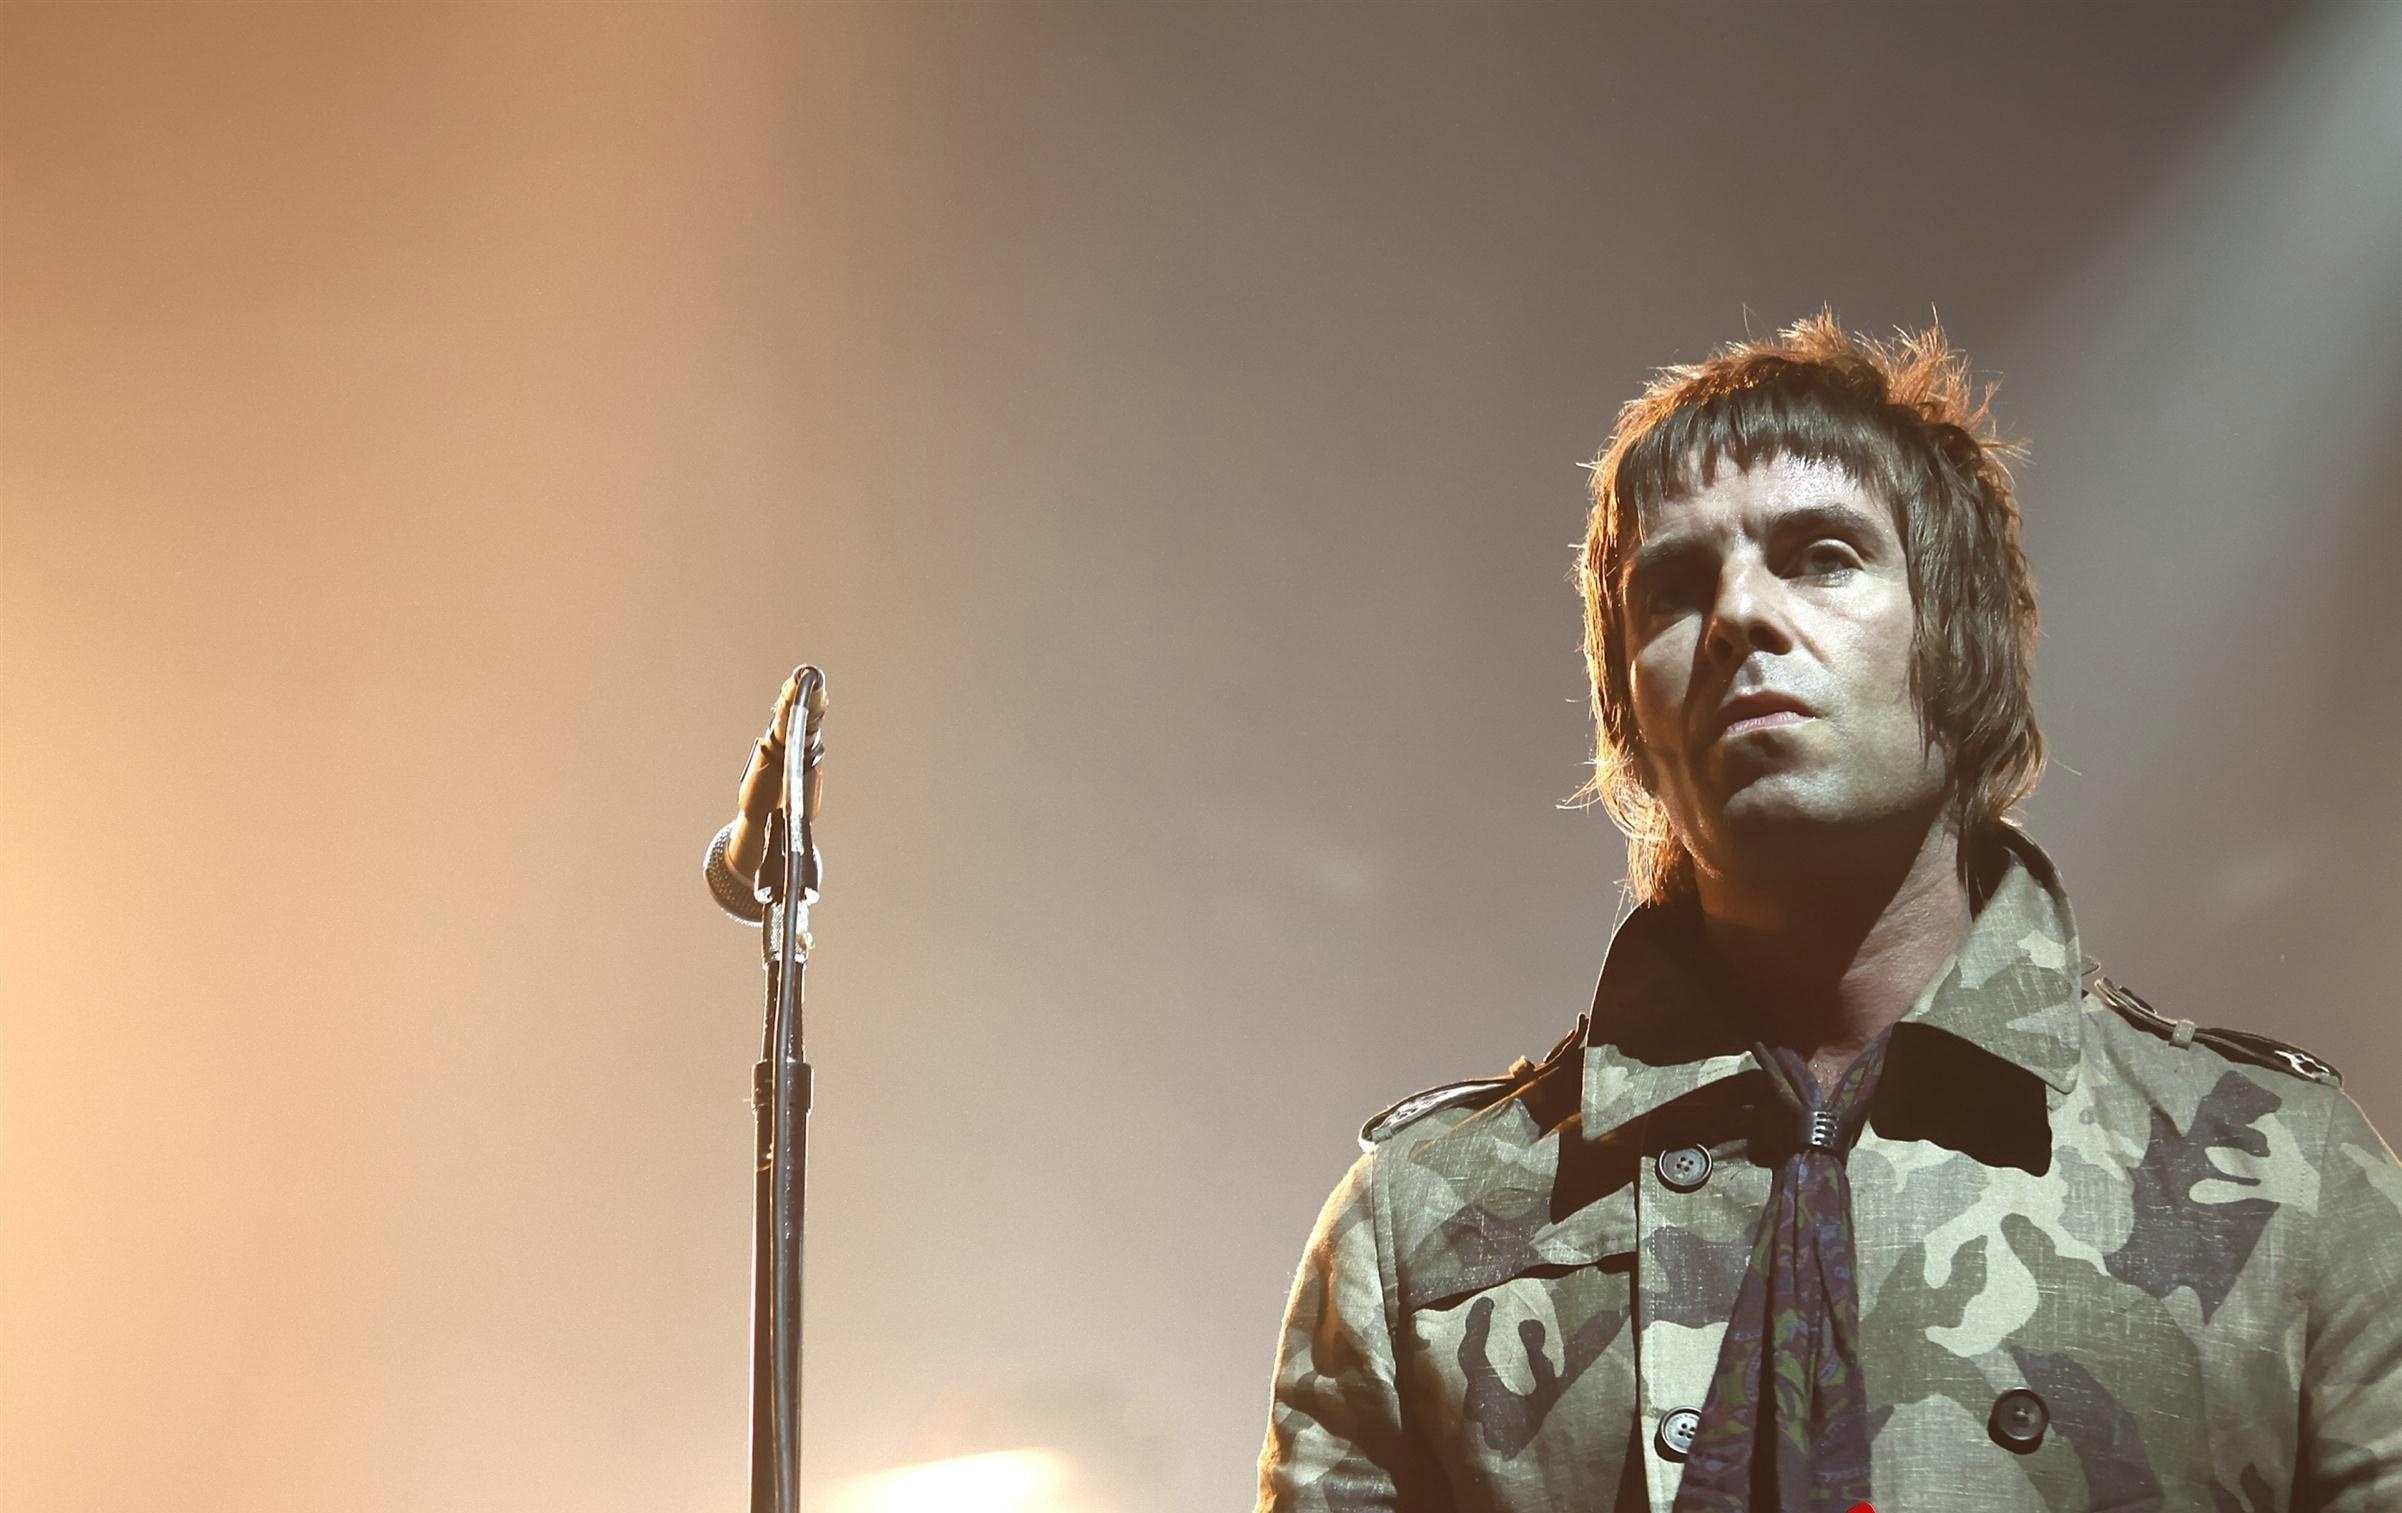 Liam Gallagher Wallpapers - Top Free Liam Gallagher Backgrounds 2410x1520